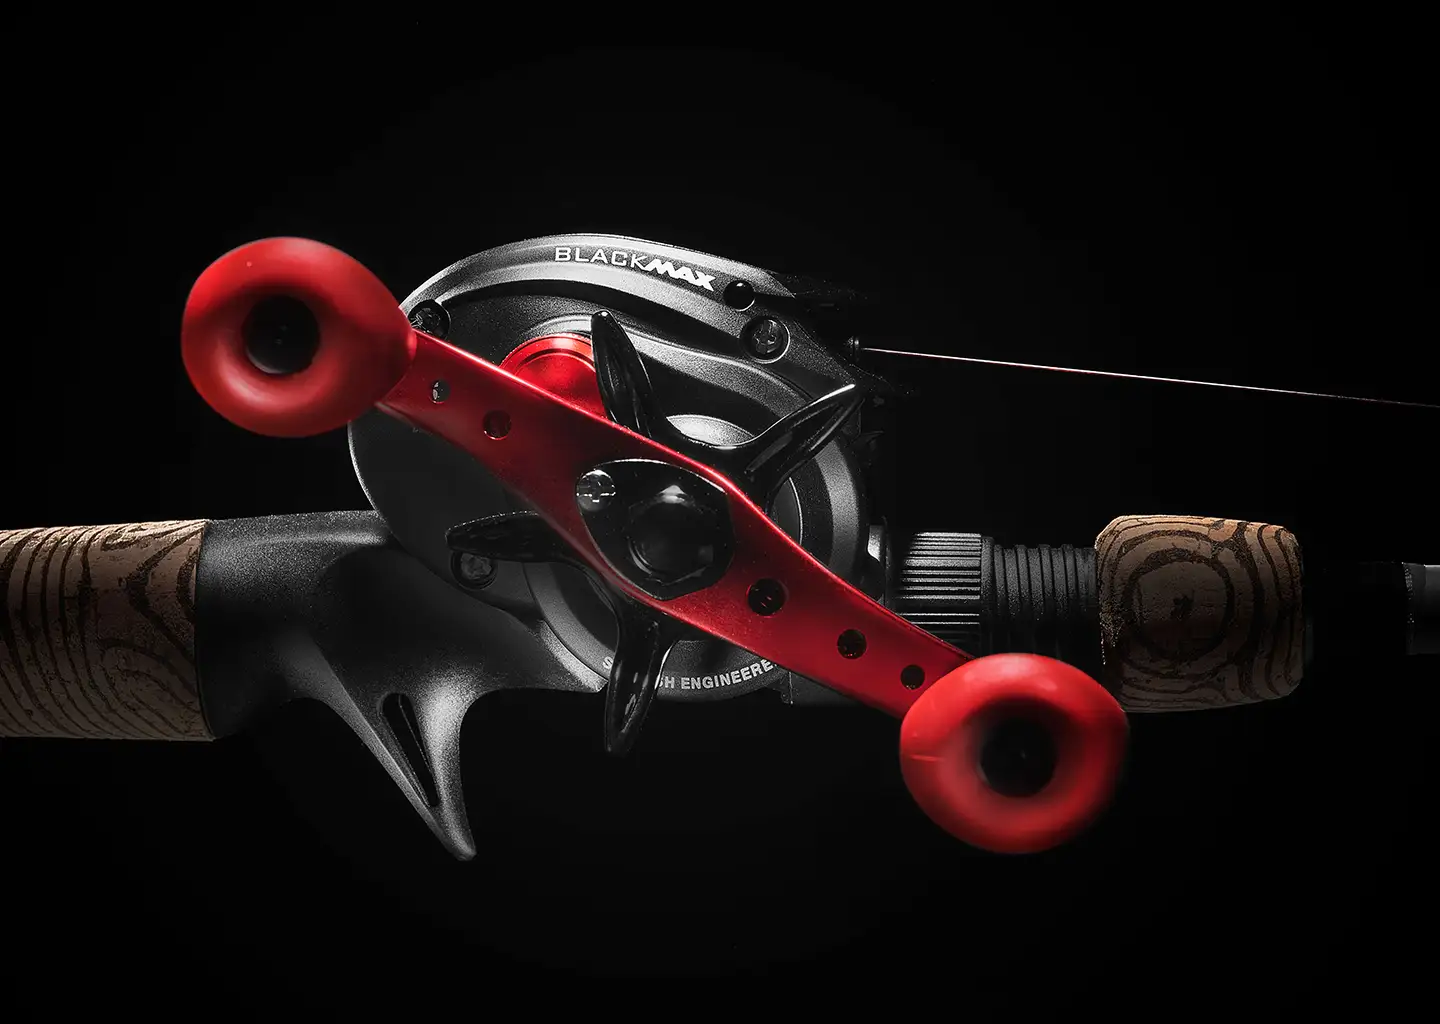 side view of a blackmax fishing reel